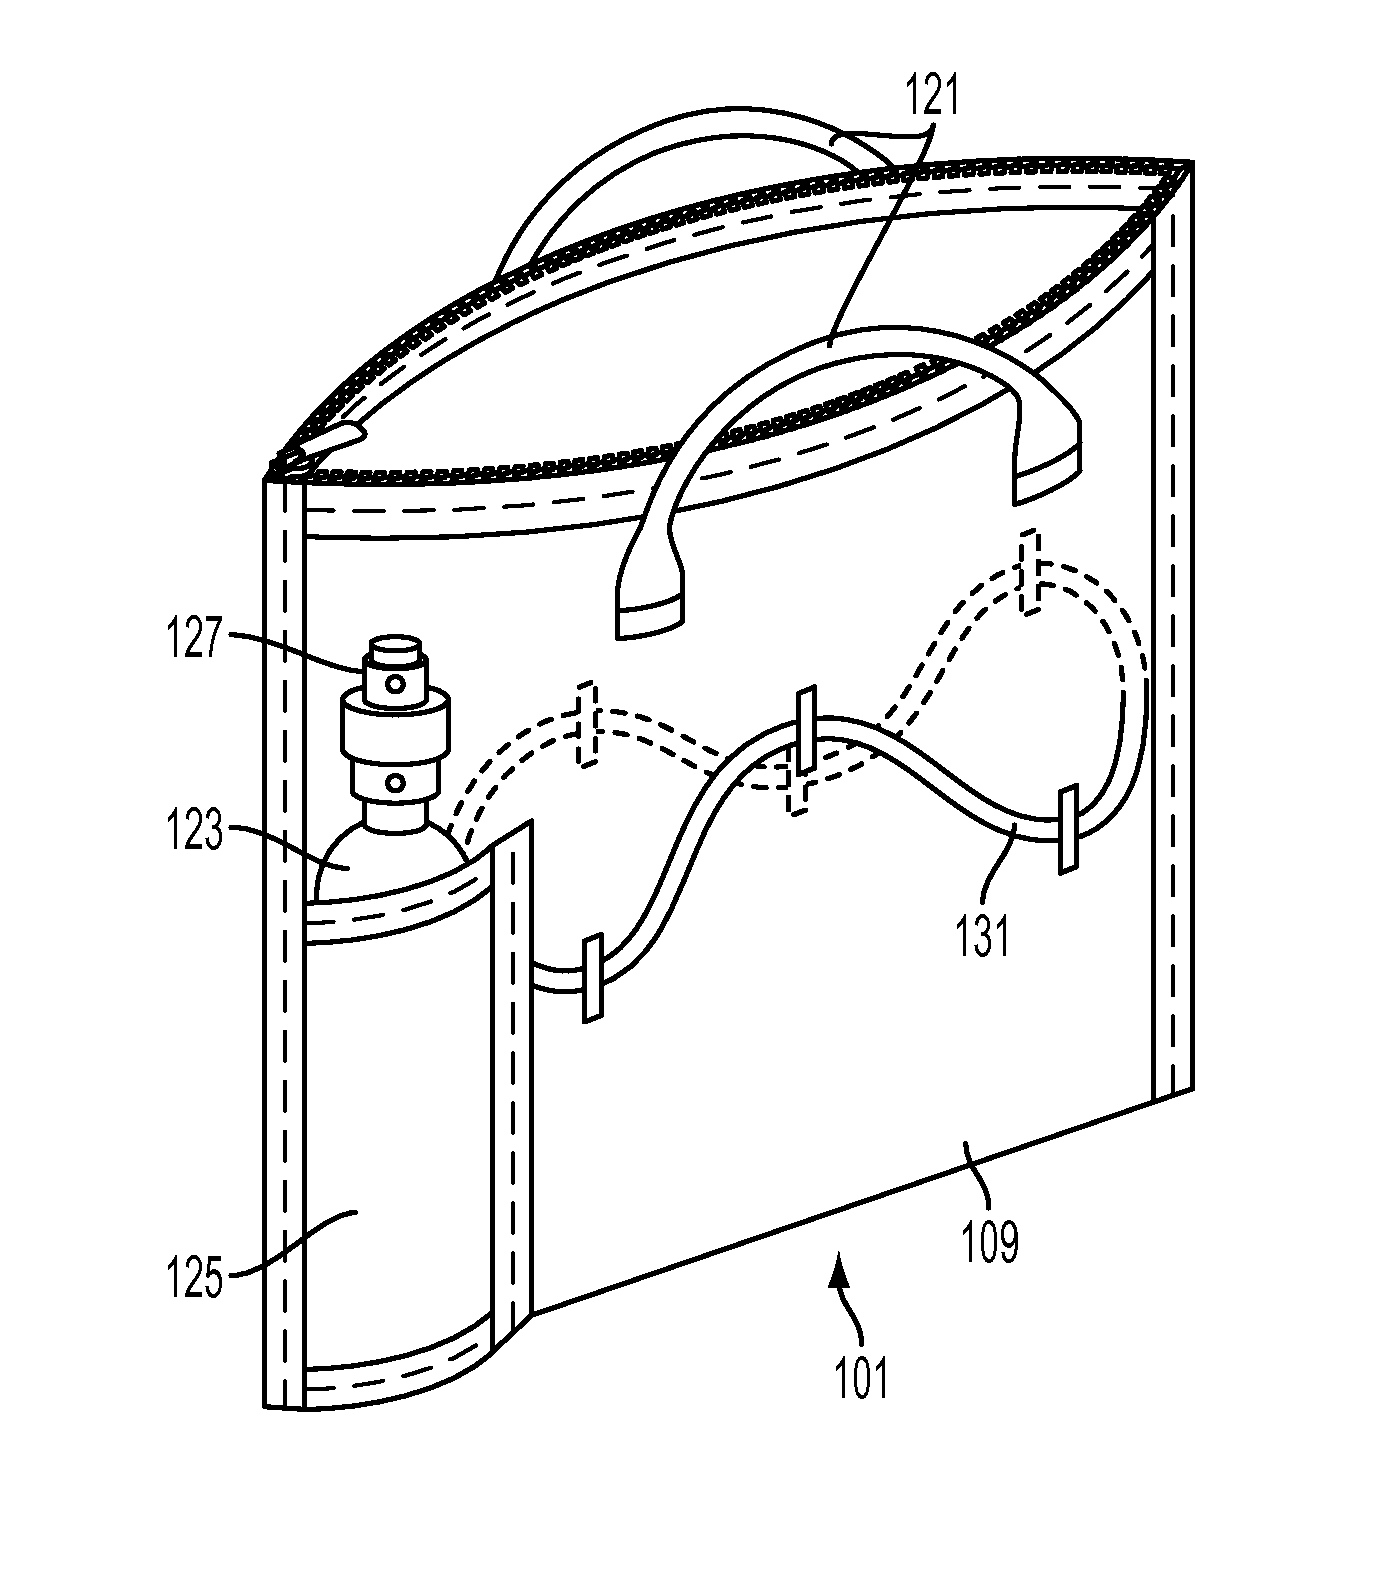 Fire and smoke containment and extinguishing apparatus